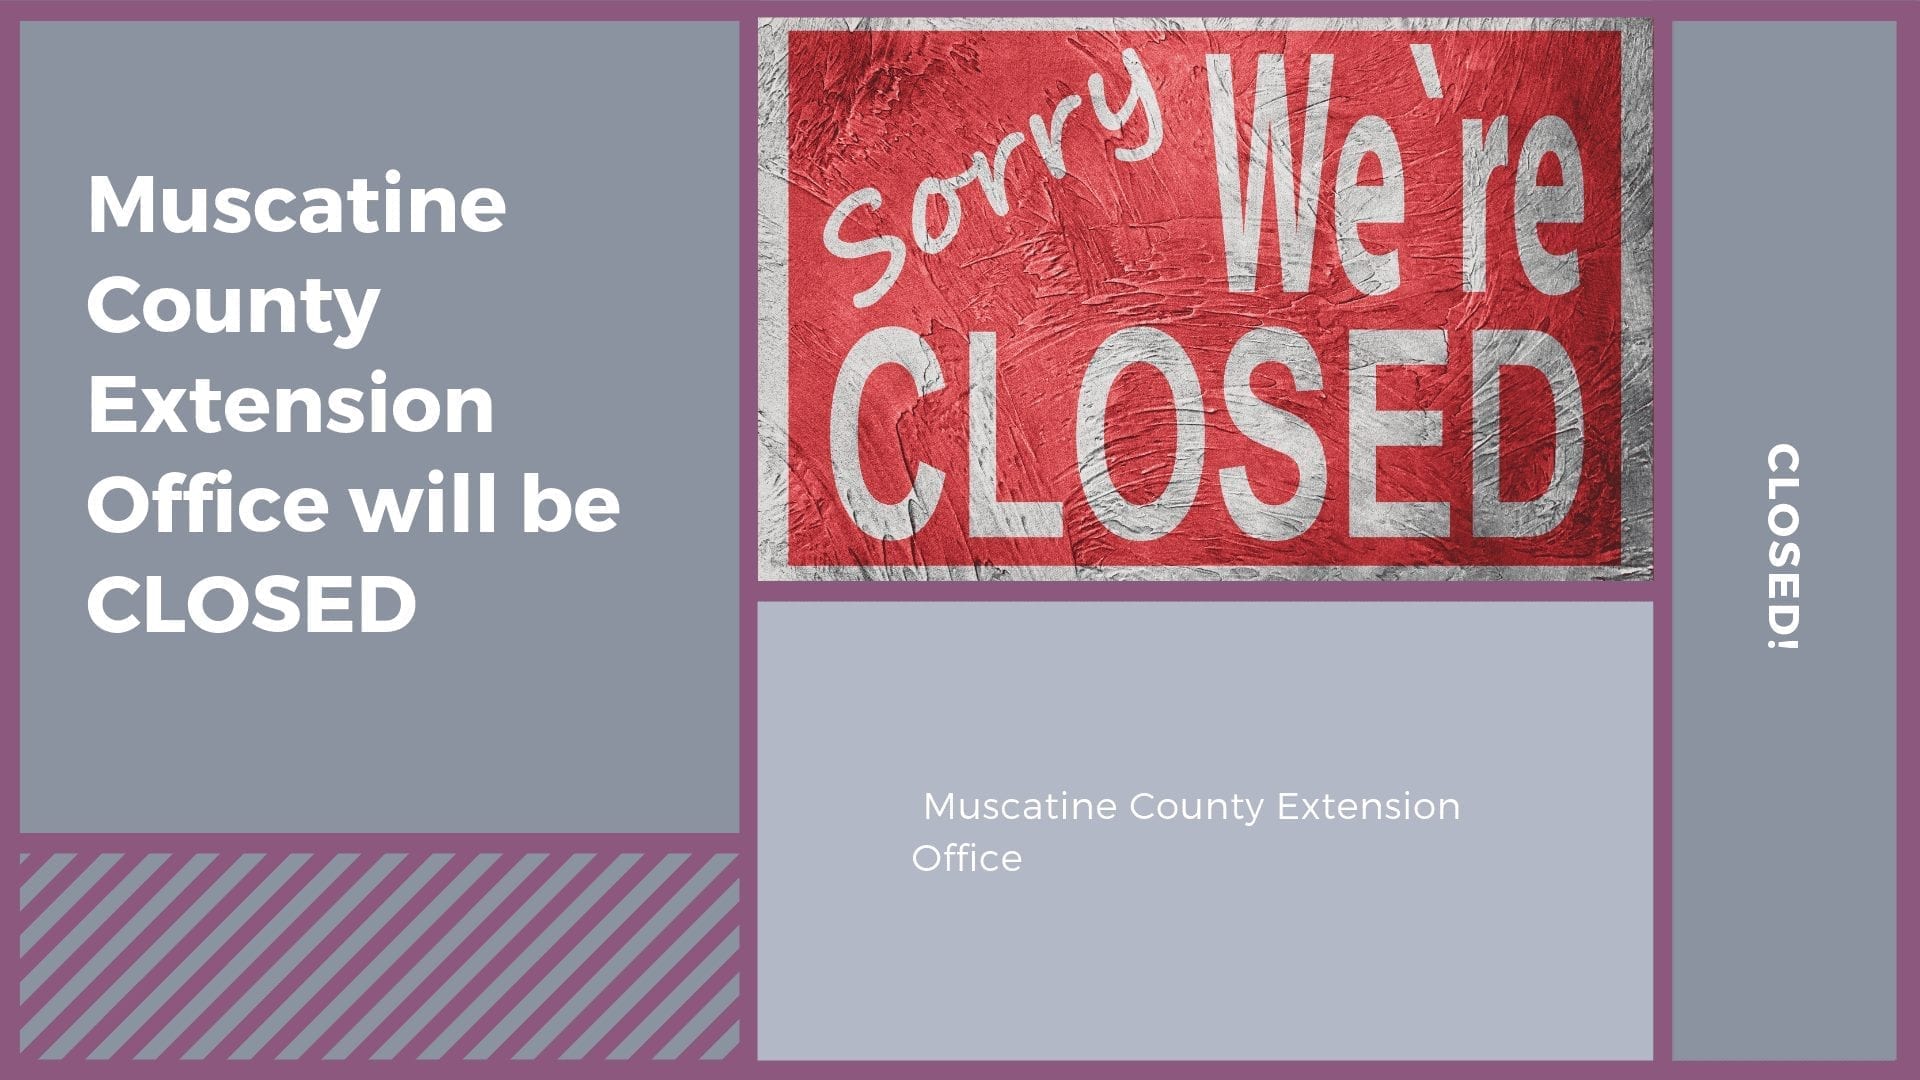 Muscatine County Extension Office will be CLOSED